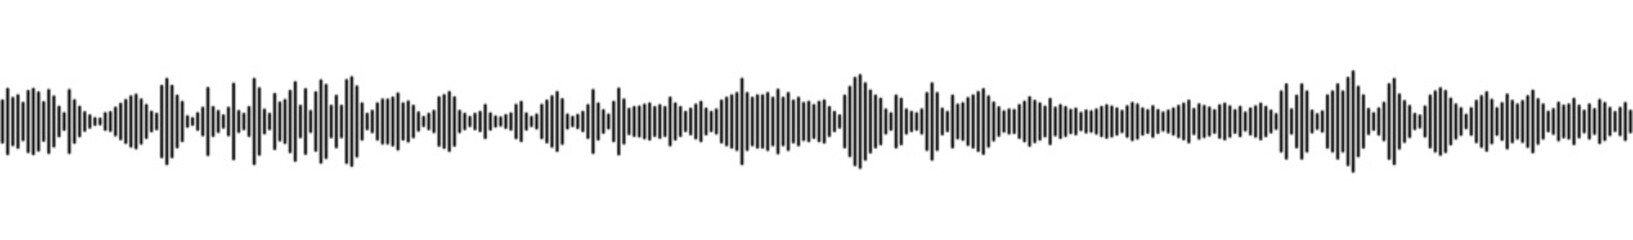 seamless sound waveform pattern for radio podcasts, music player, video editor, voise message in social media chats, voice assistant, recorder. vector illustration - 539430655